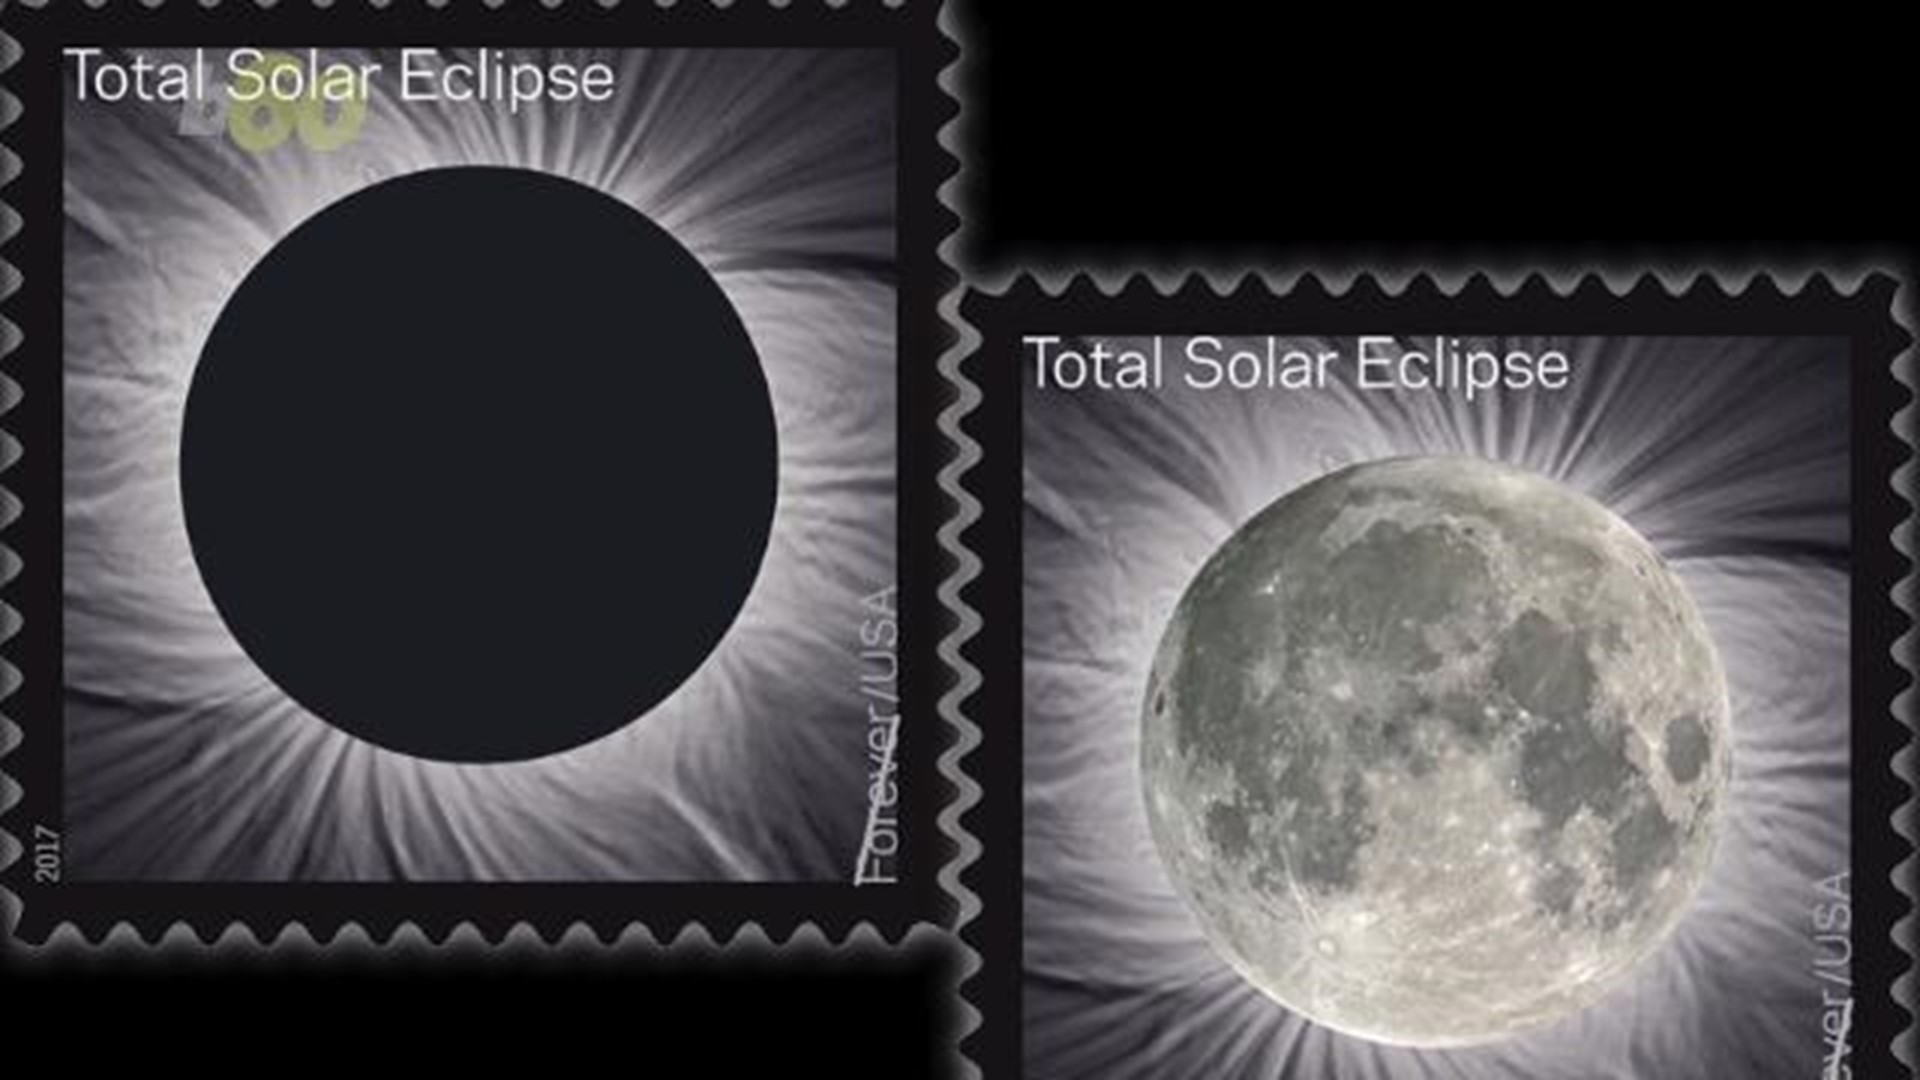 Even the United States Postal Service is gearing up for the rare solar eclipse craze with a stamp that changes when you touch it. Sean Dowling (@seandowlingtv) has more.